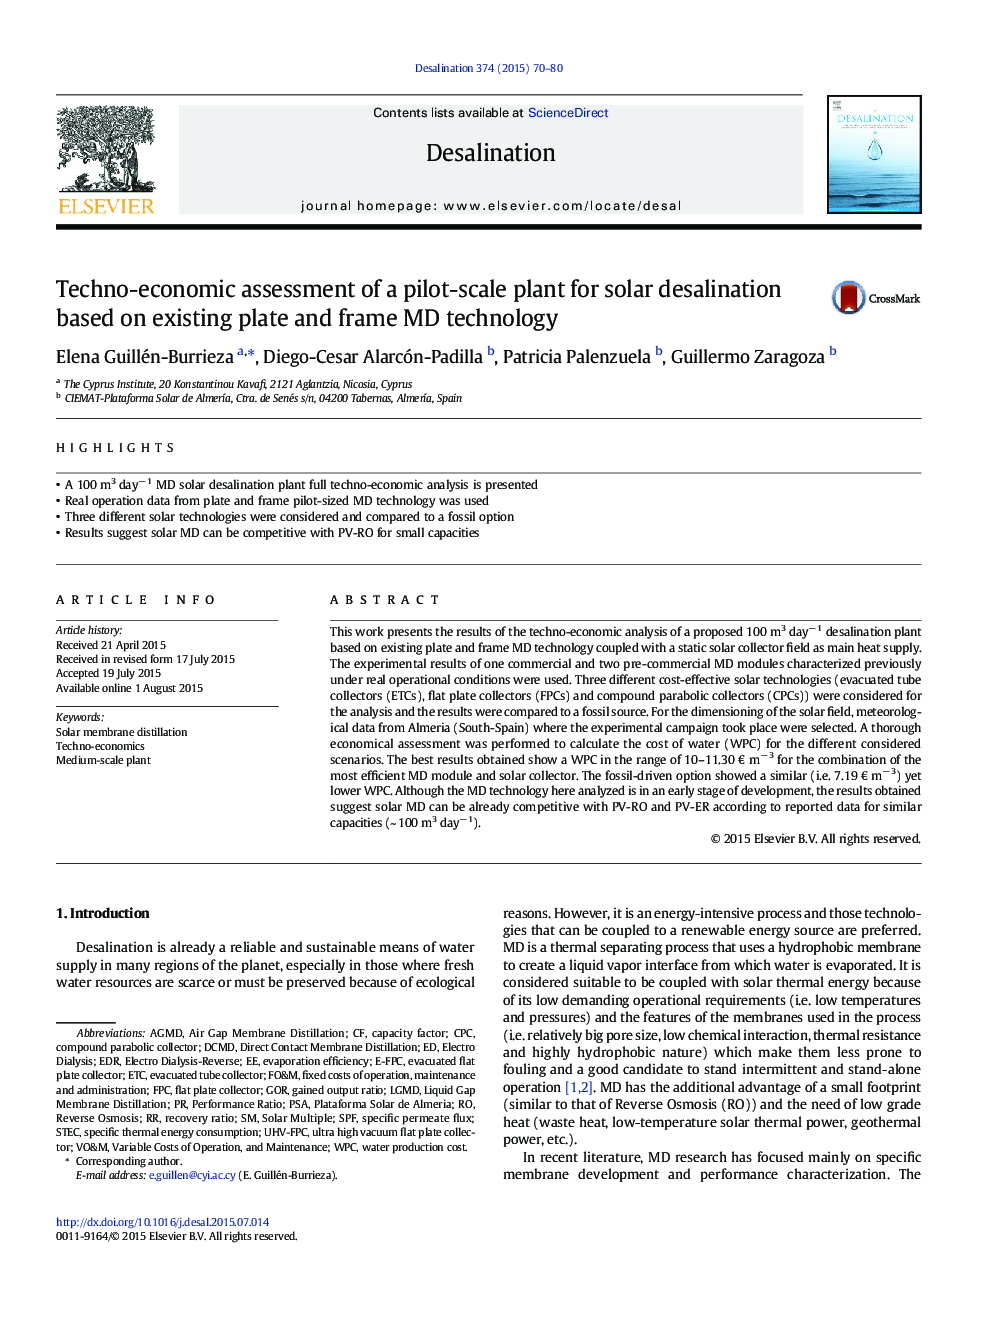 Techno-economic assessment of a pilot-scale plant for solar desalination based on existing plate and frame MD technology